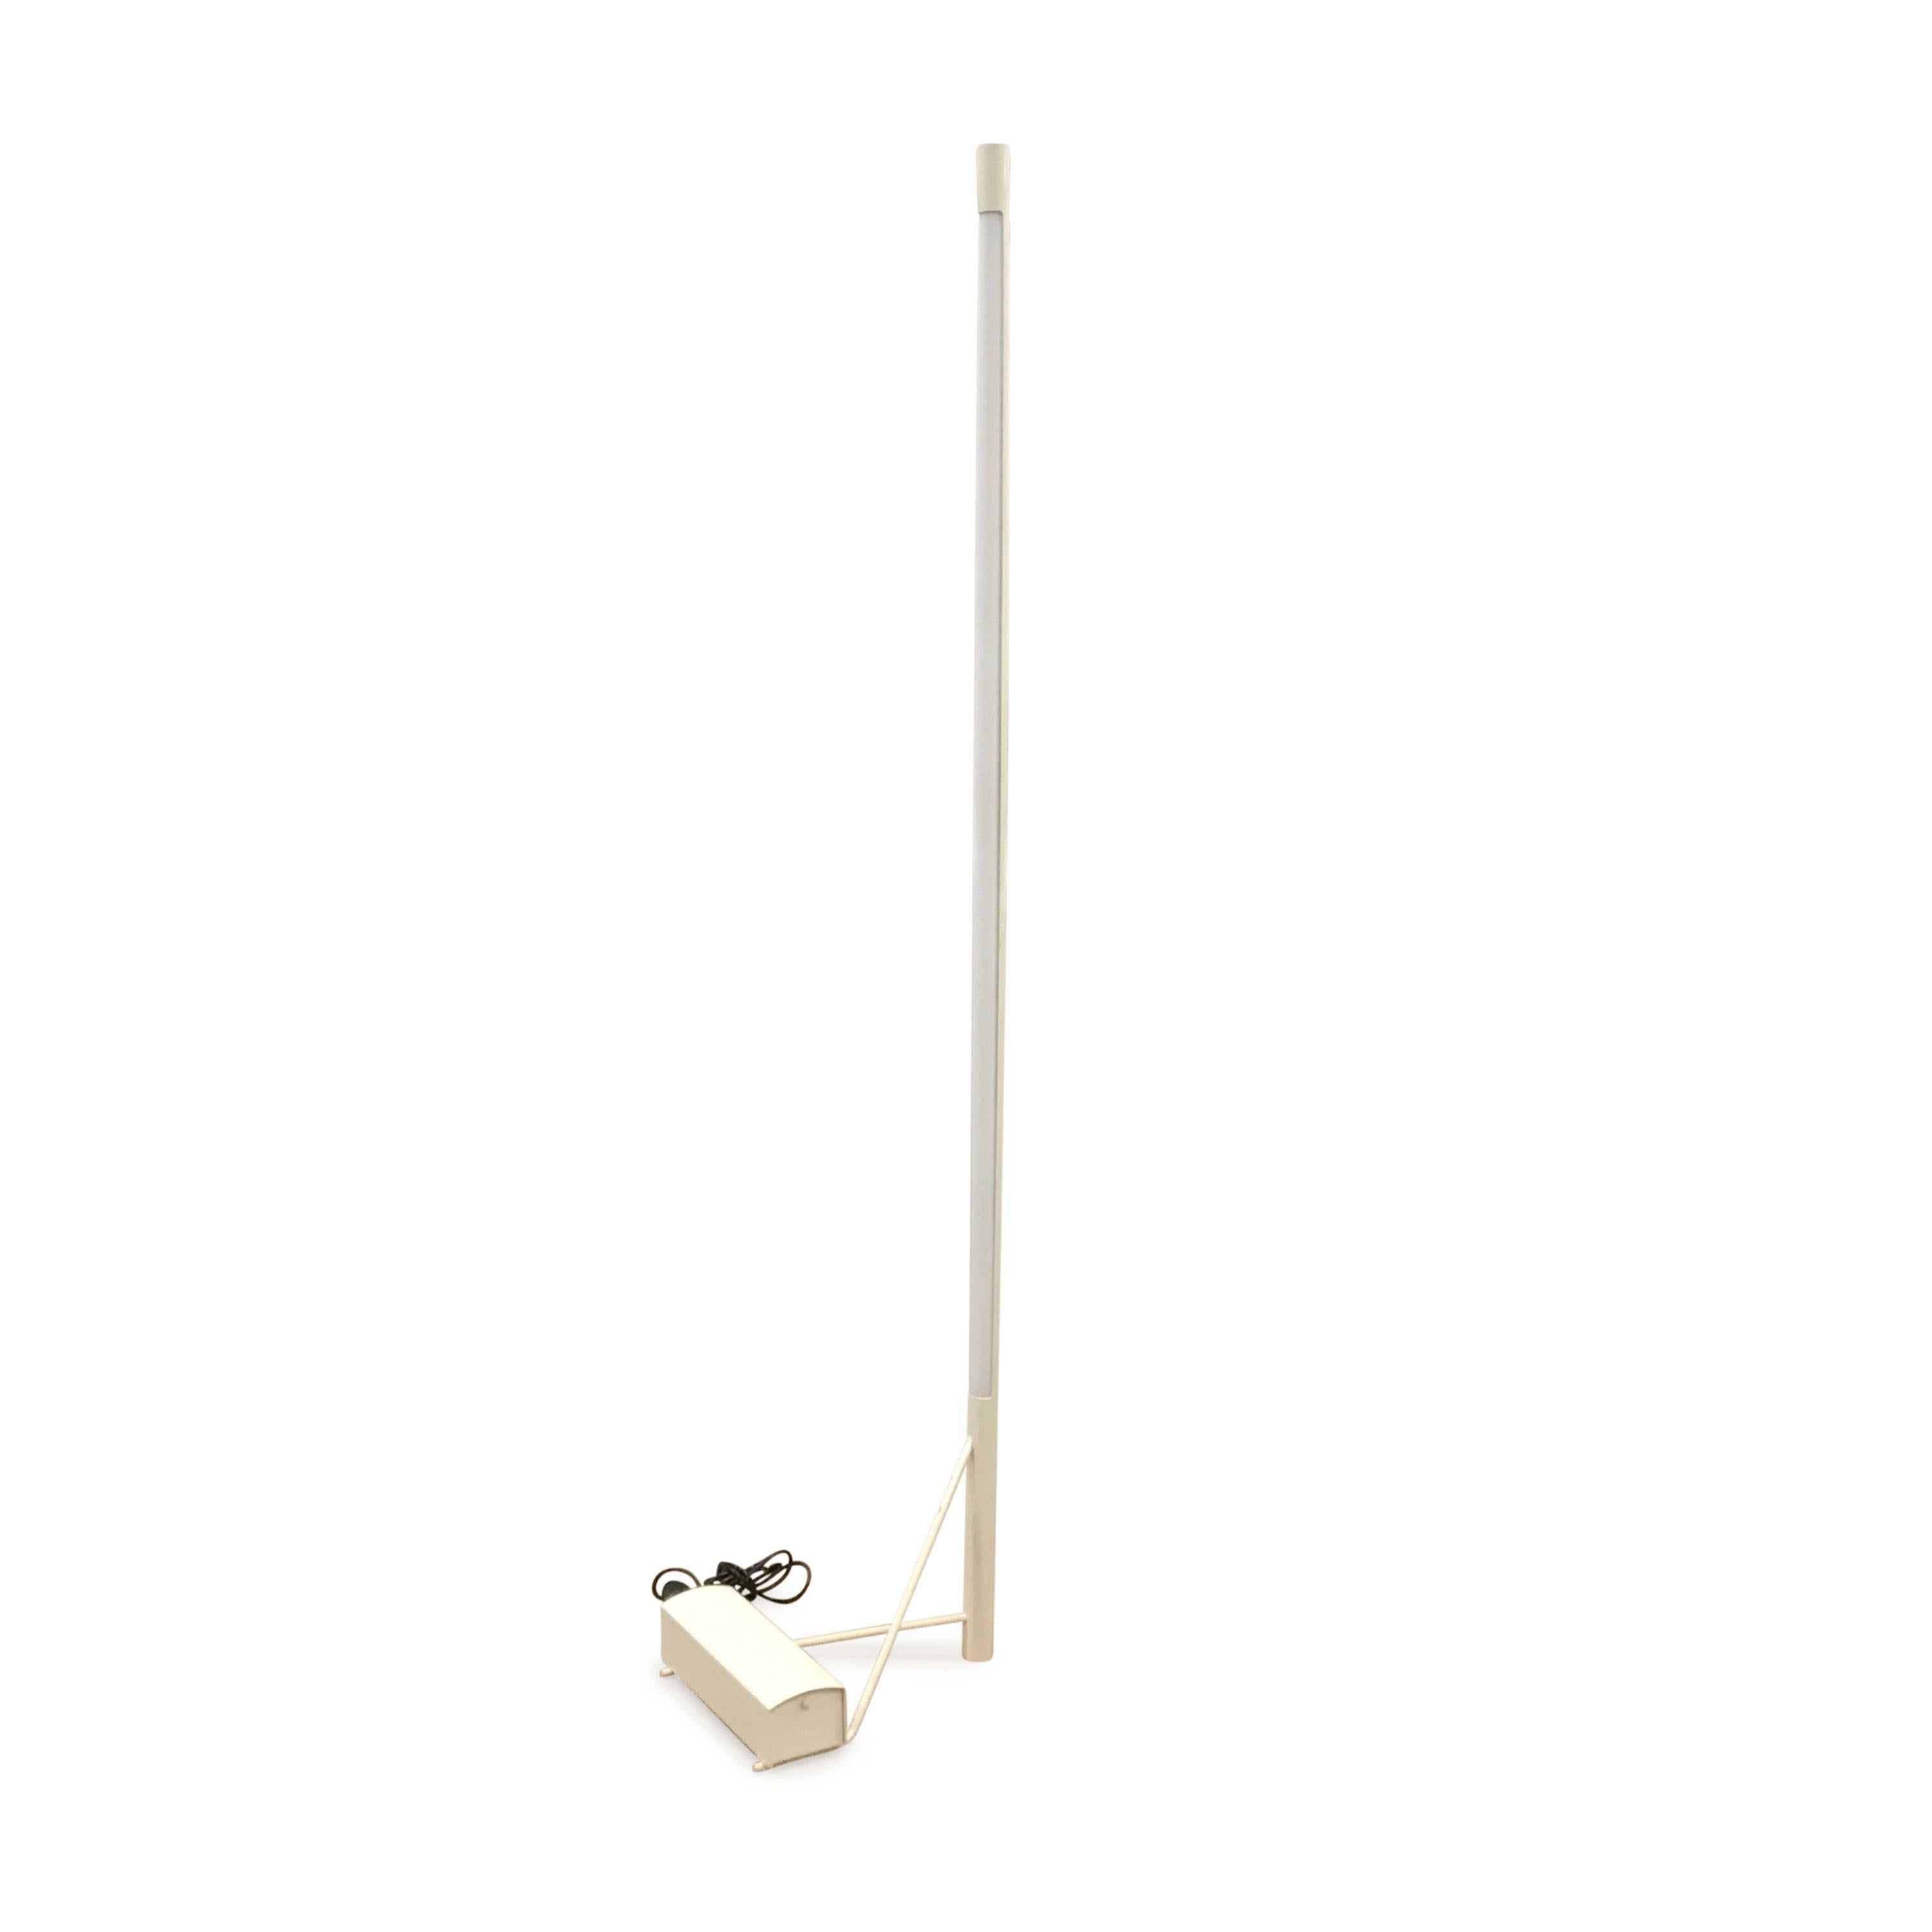 The renowned designer Gino Sarfatti created this ahead-of-its-time piece in 1954 and for more than 60 years its minimalistic Silhouette has complemented even the most modern homes and offices worldwide. The light source for this smart floor lamp is